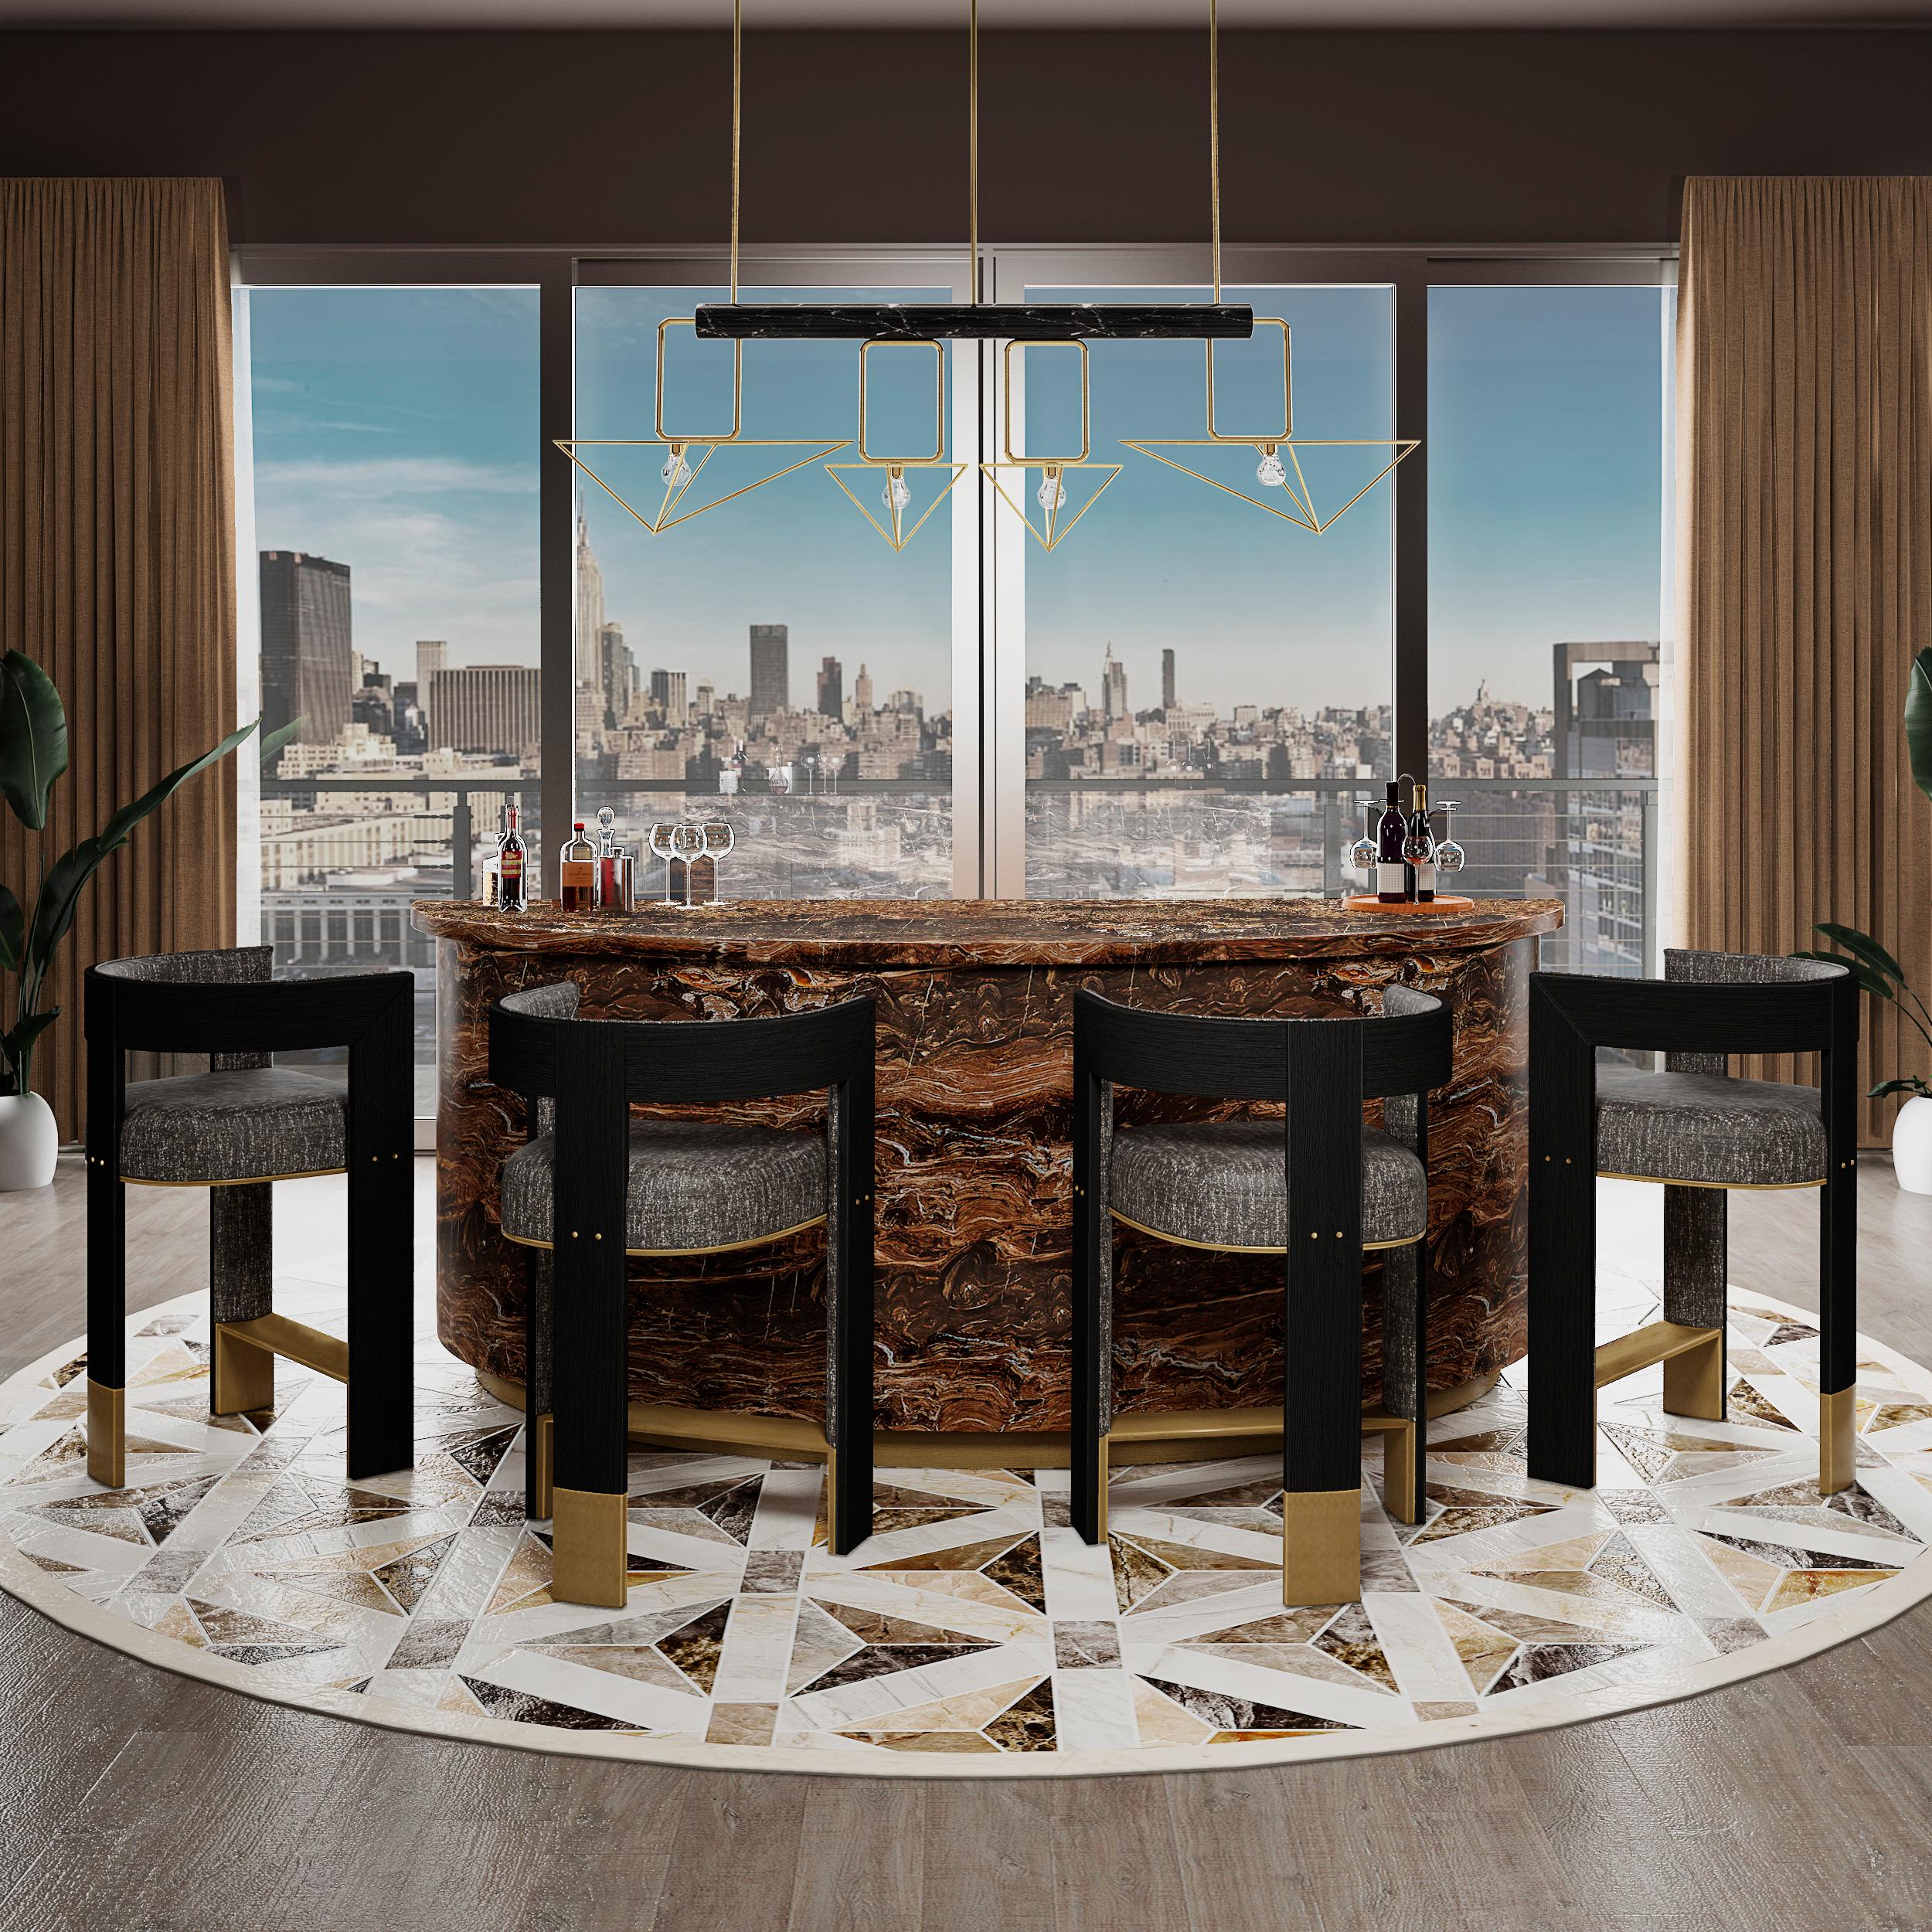 Brooklyn bar chair is one of the newest pieces designed by Porus Studio. 
Since its construction, the Brooklyn Bridge become an icon of New York City. Connecting Manhattan 
to New York, It was the first fixed crossing across the East River. The